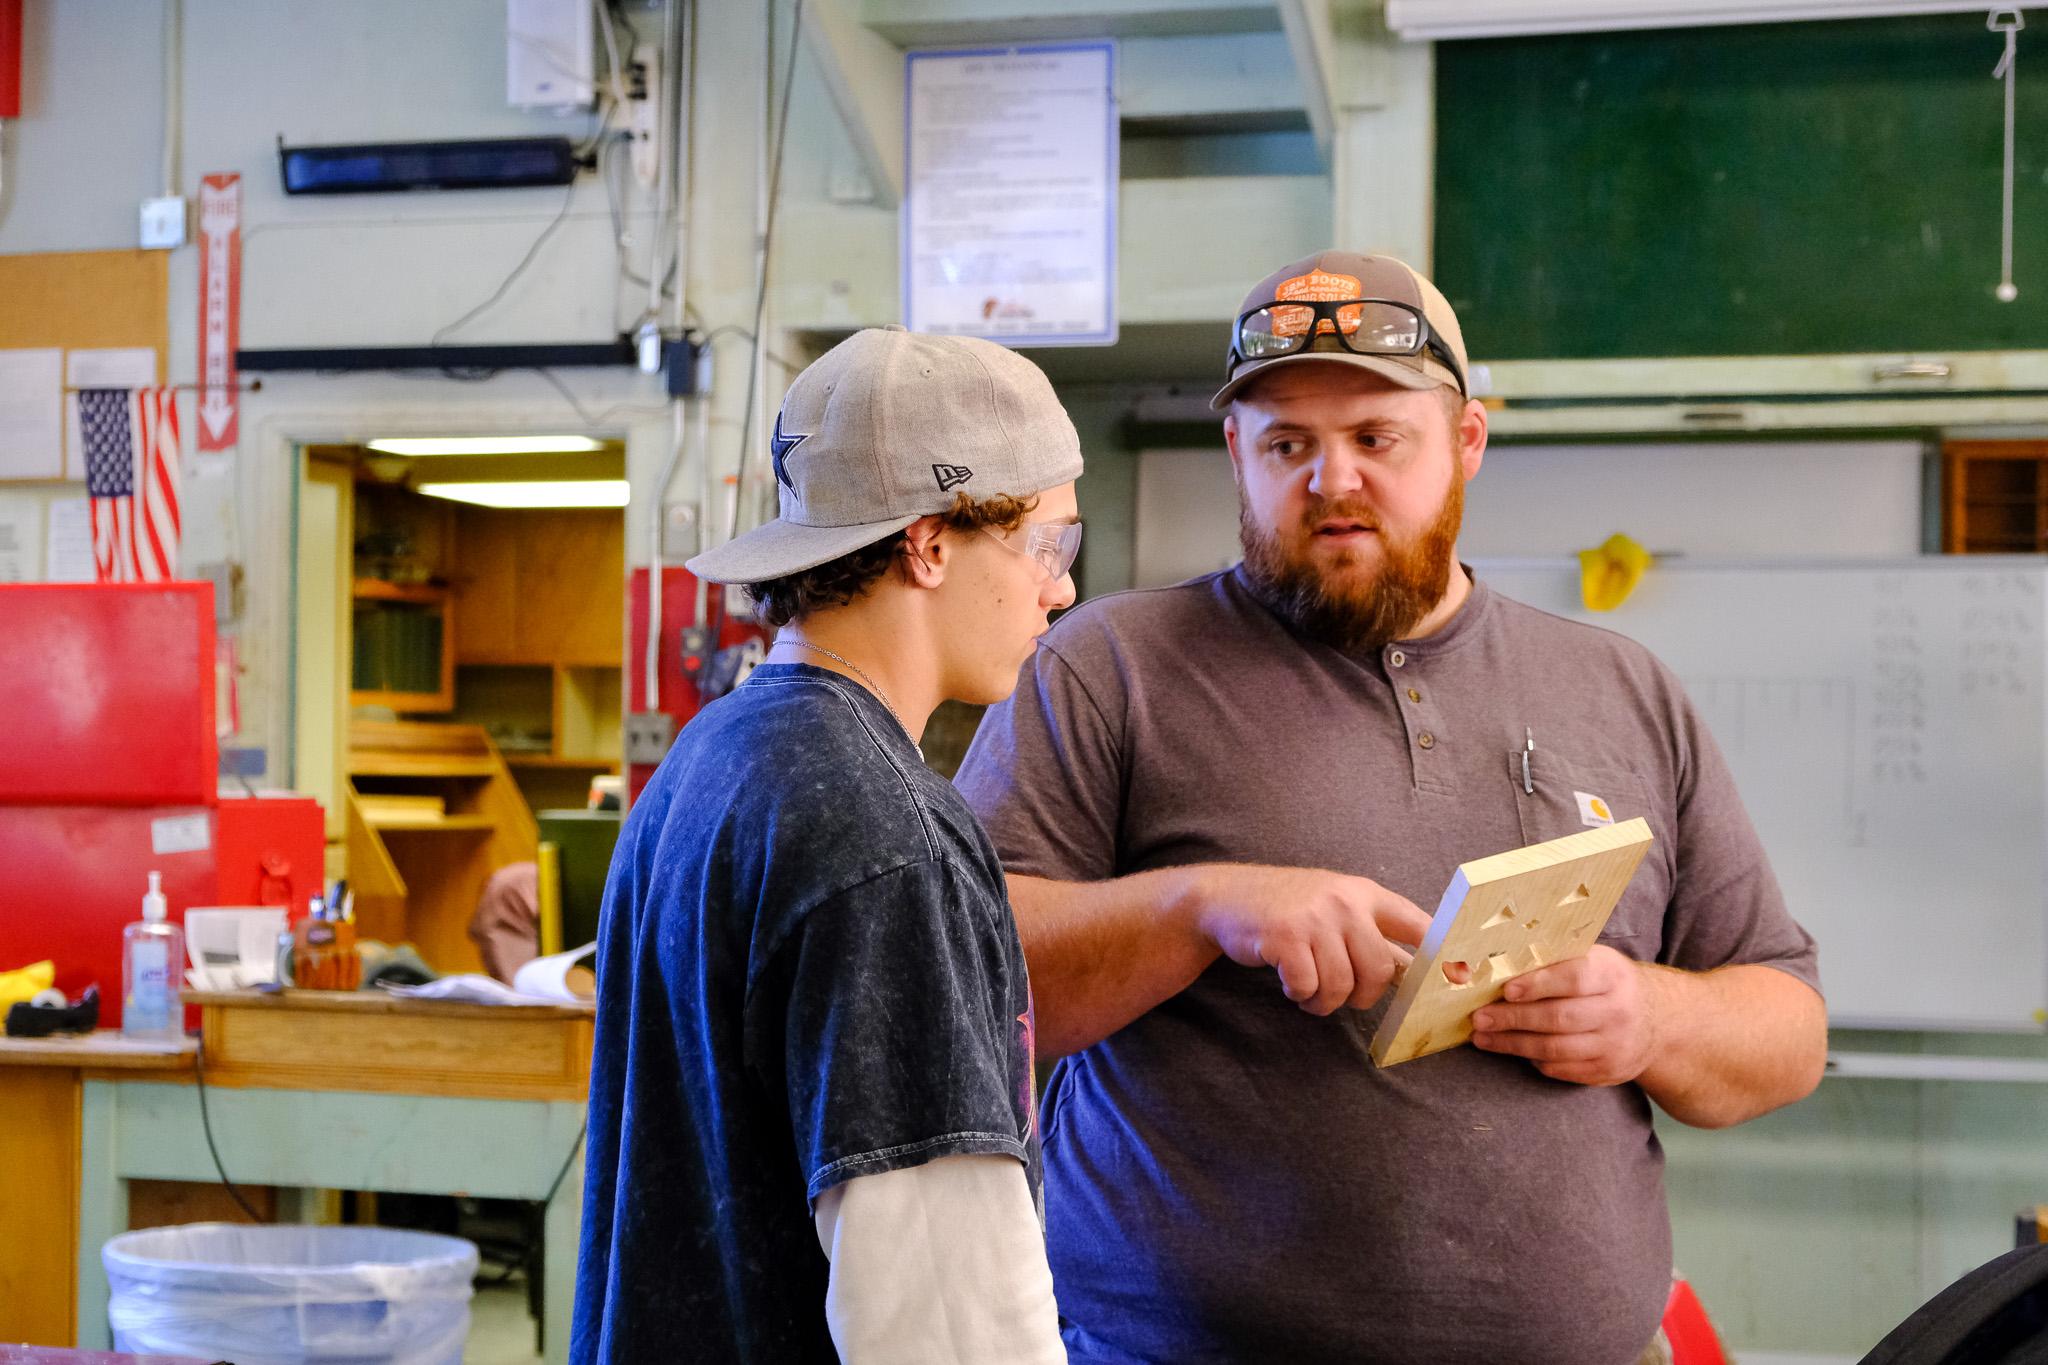 Ag teacher showing student next step in project